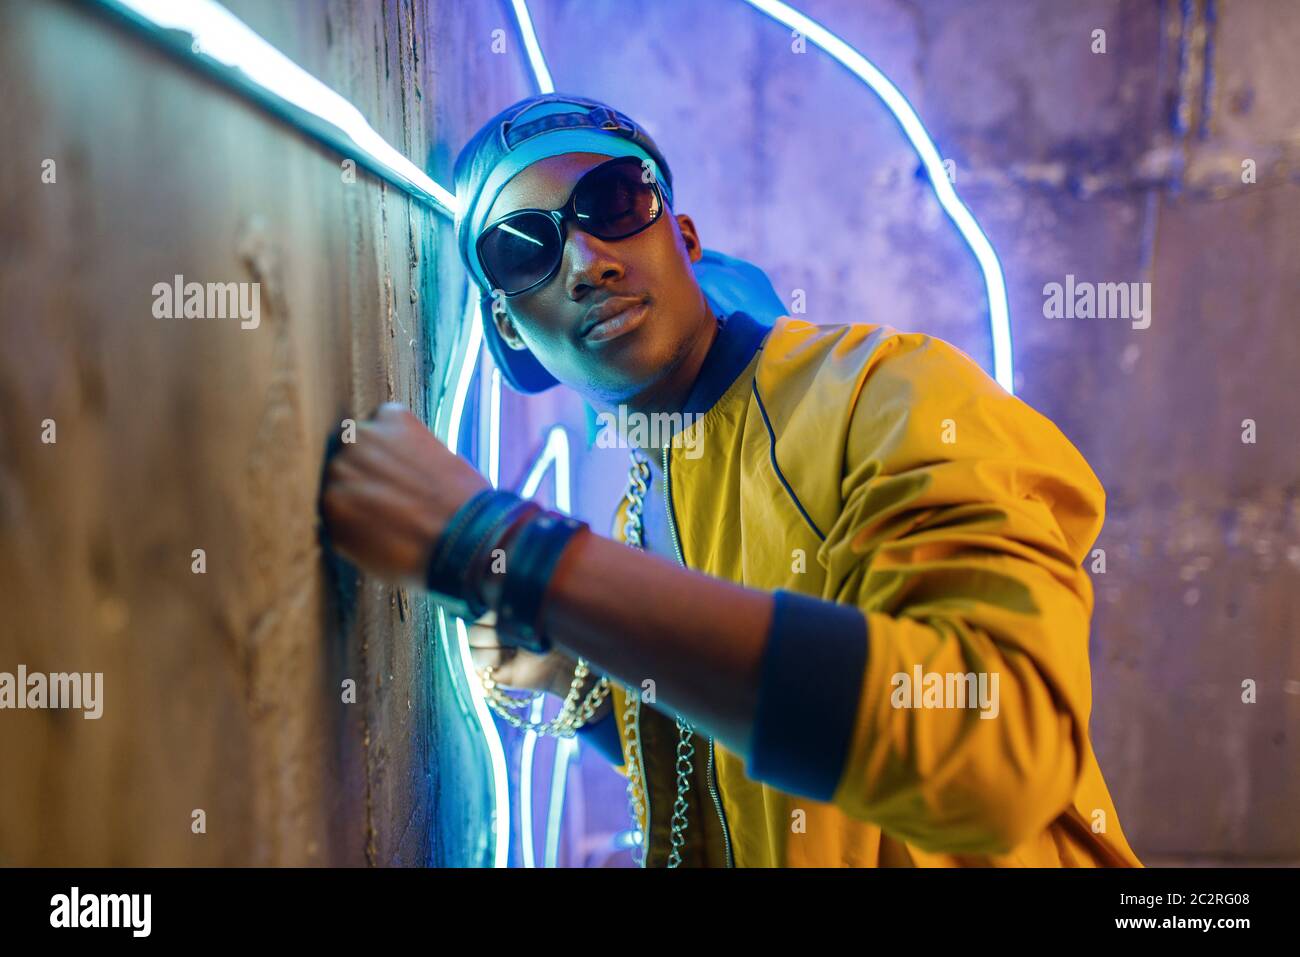 Black rapper in underpass neon light on background. Rap performer in club with grunge walls, underground music Stock Photo